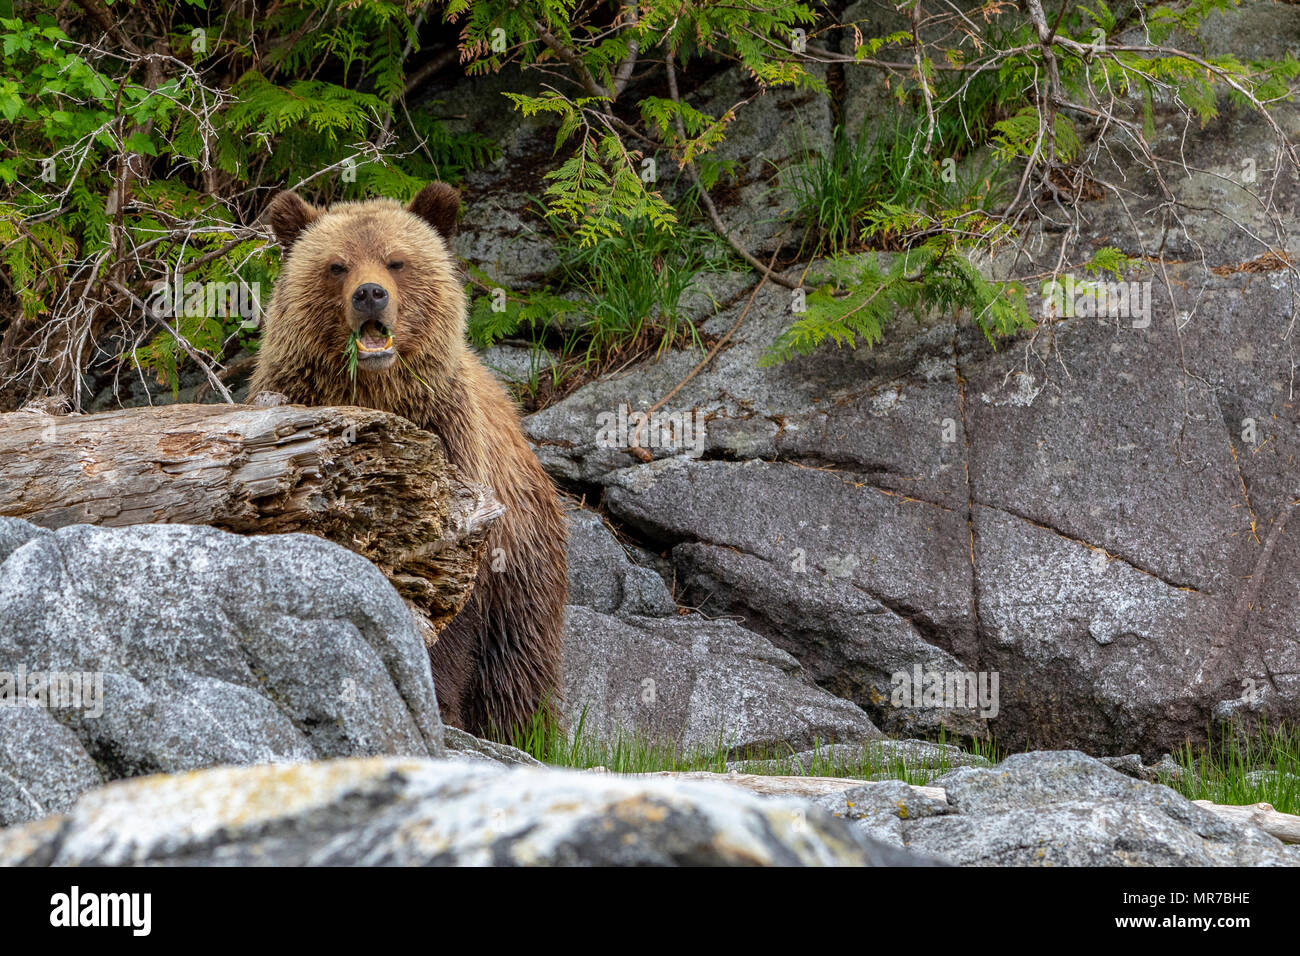 Grizzly bear in Knight Inlet. British Columbia, Canada Stock Photo